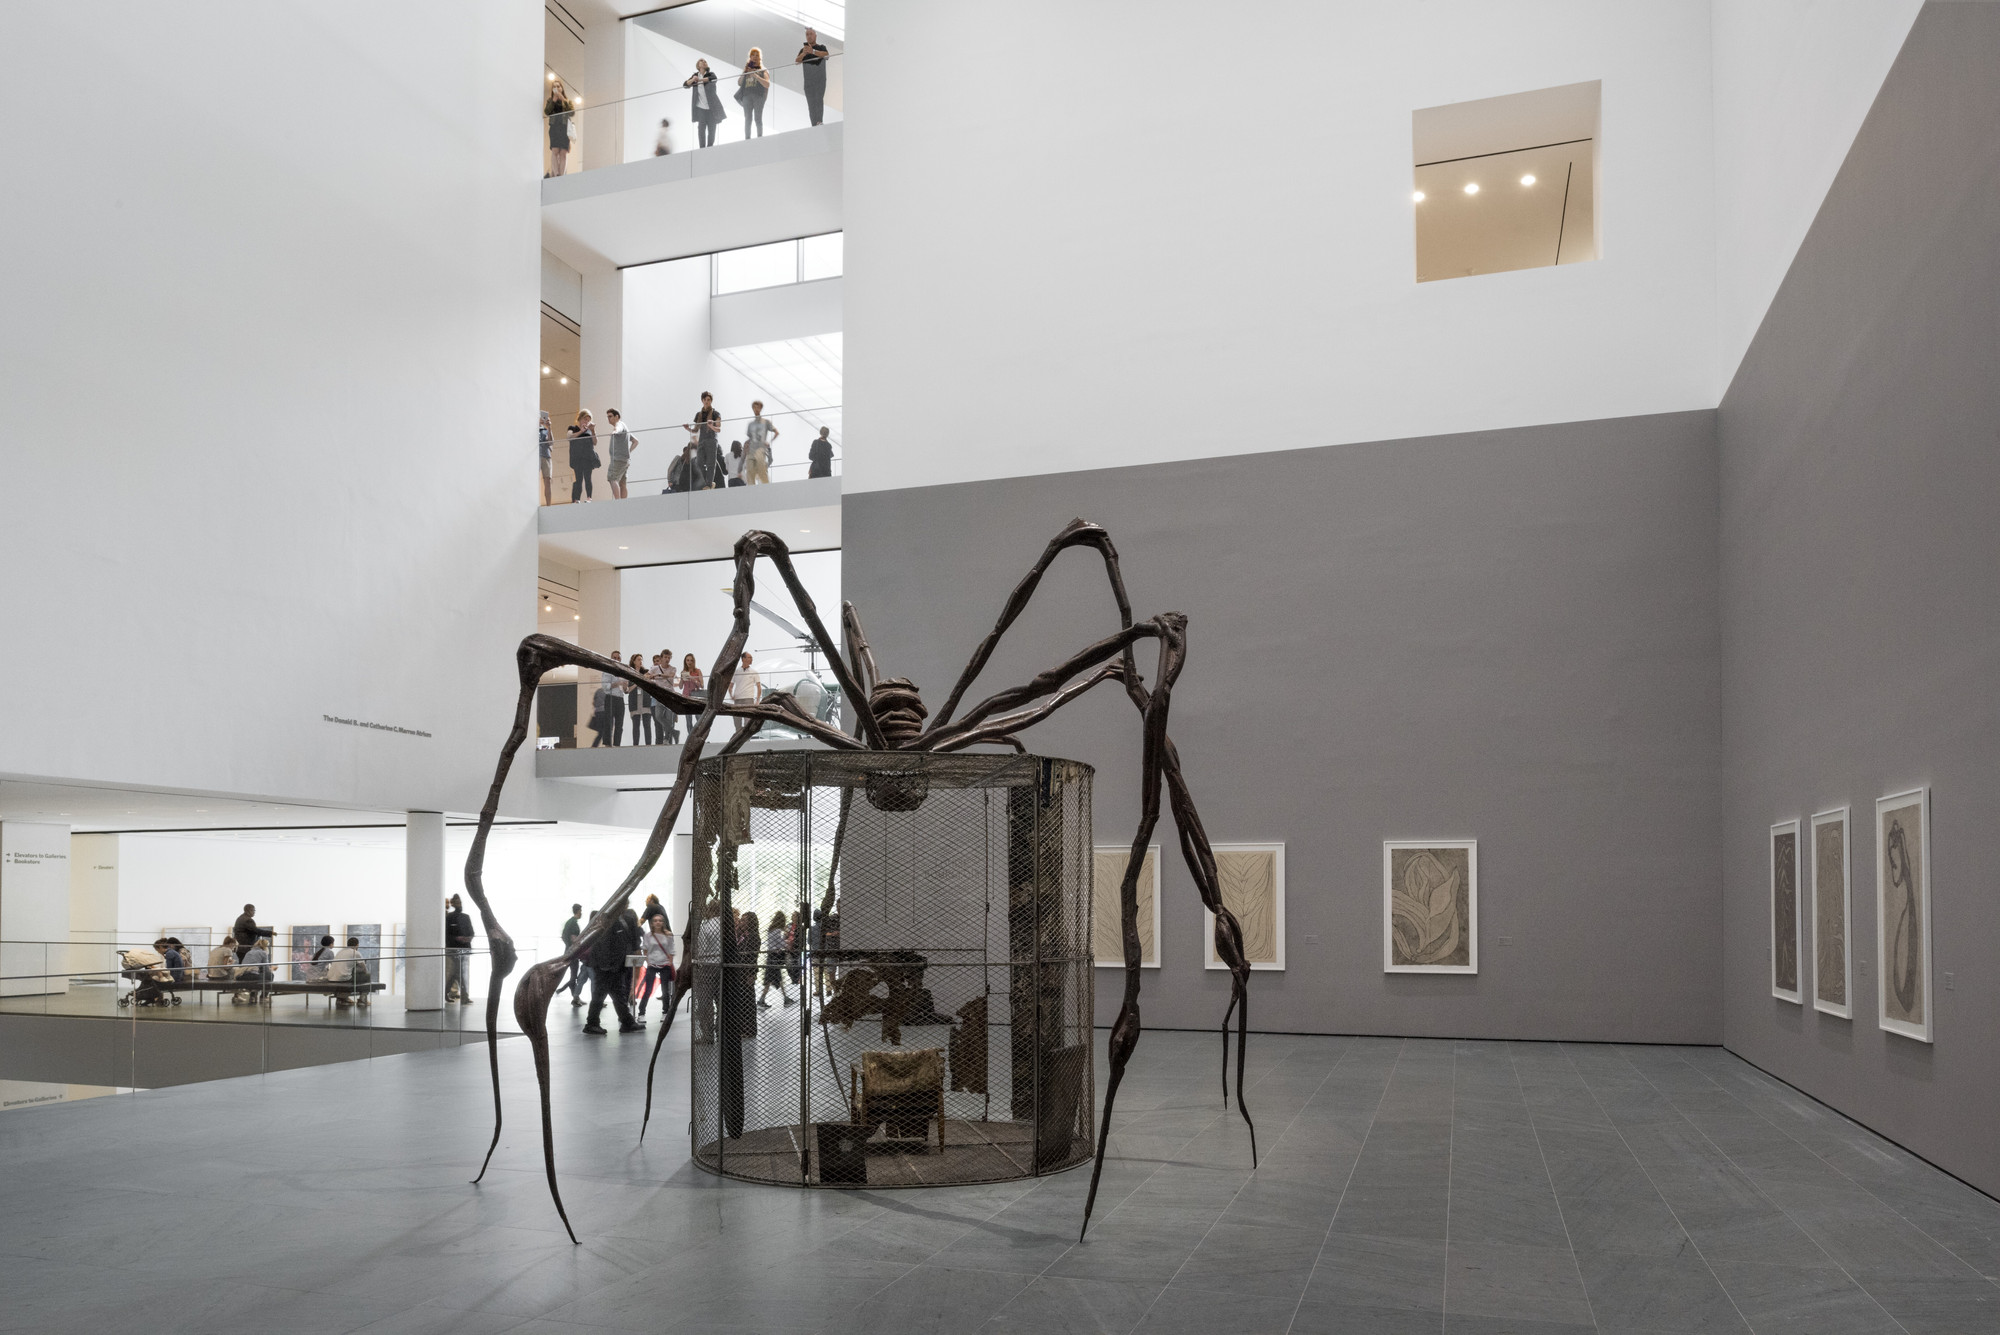 Louise Bourgeois, Exhibitions & Projects, Exhibitions